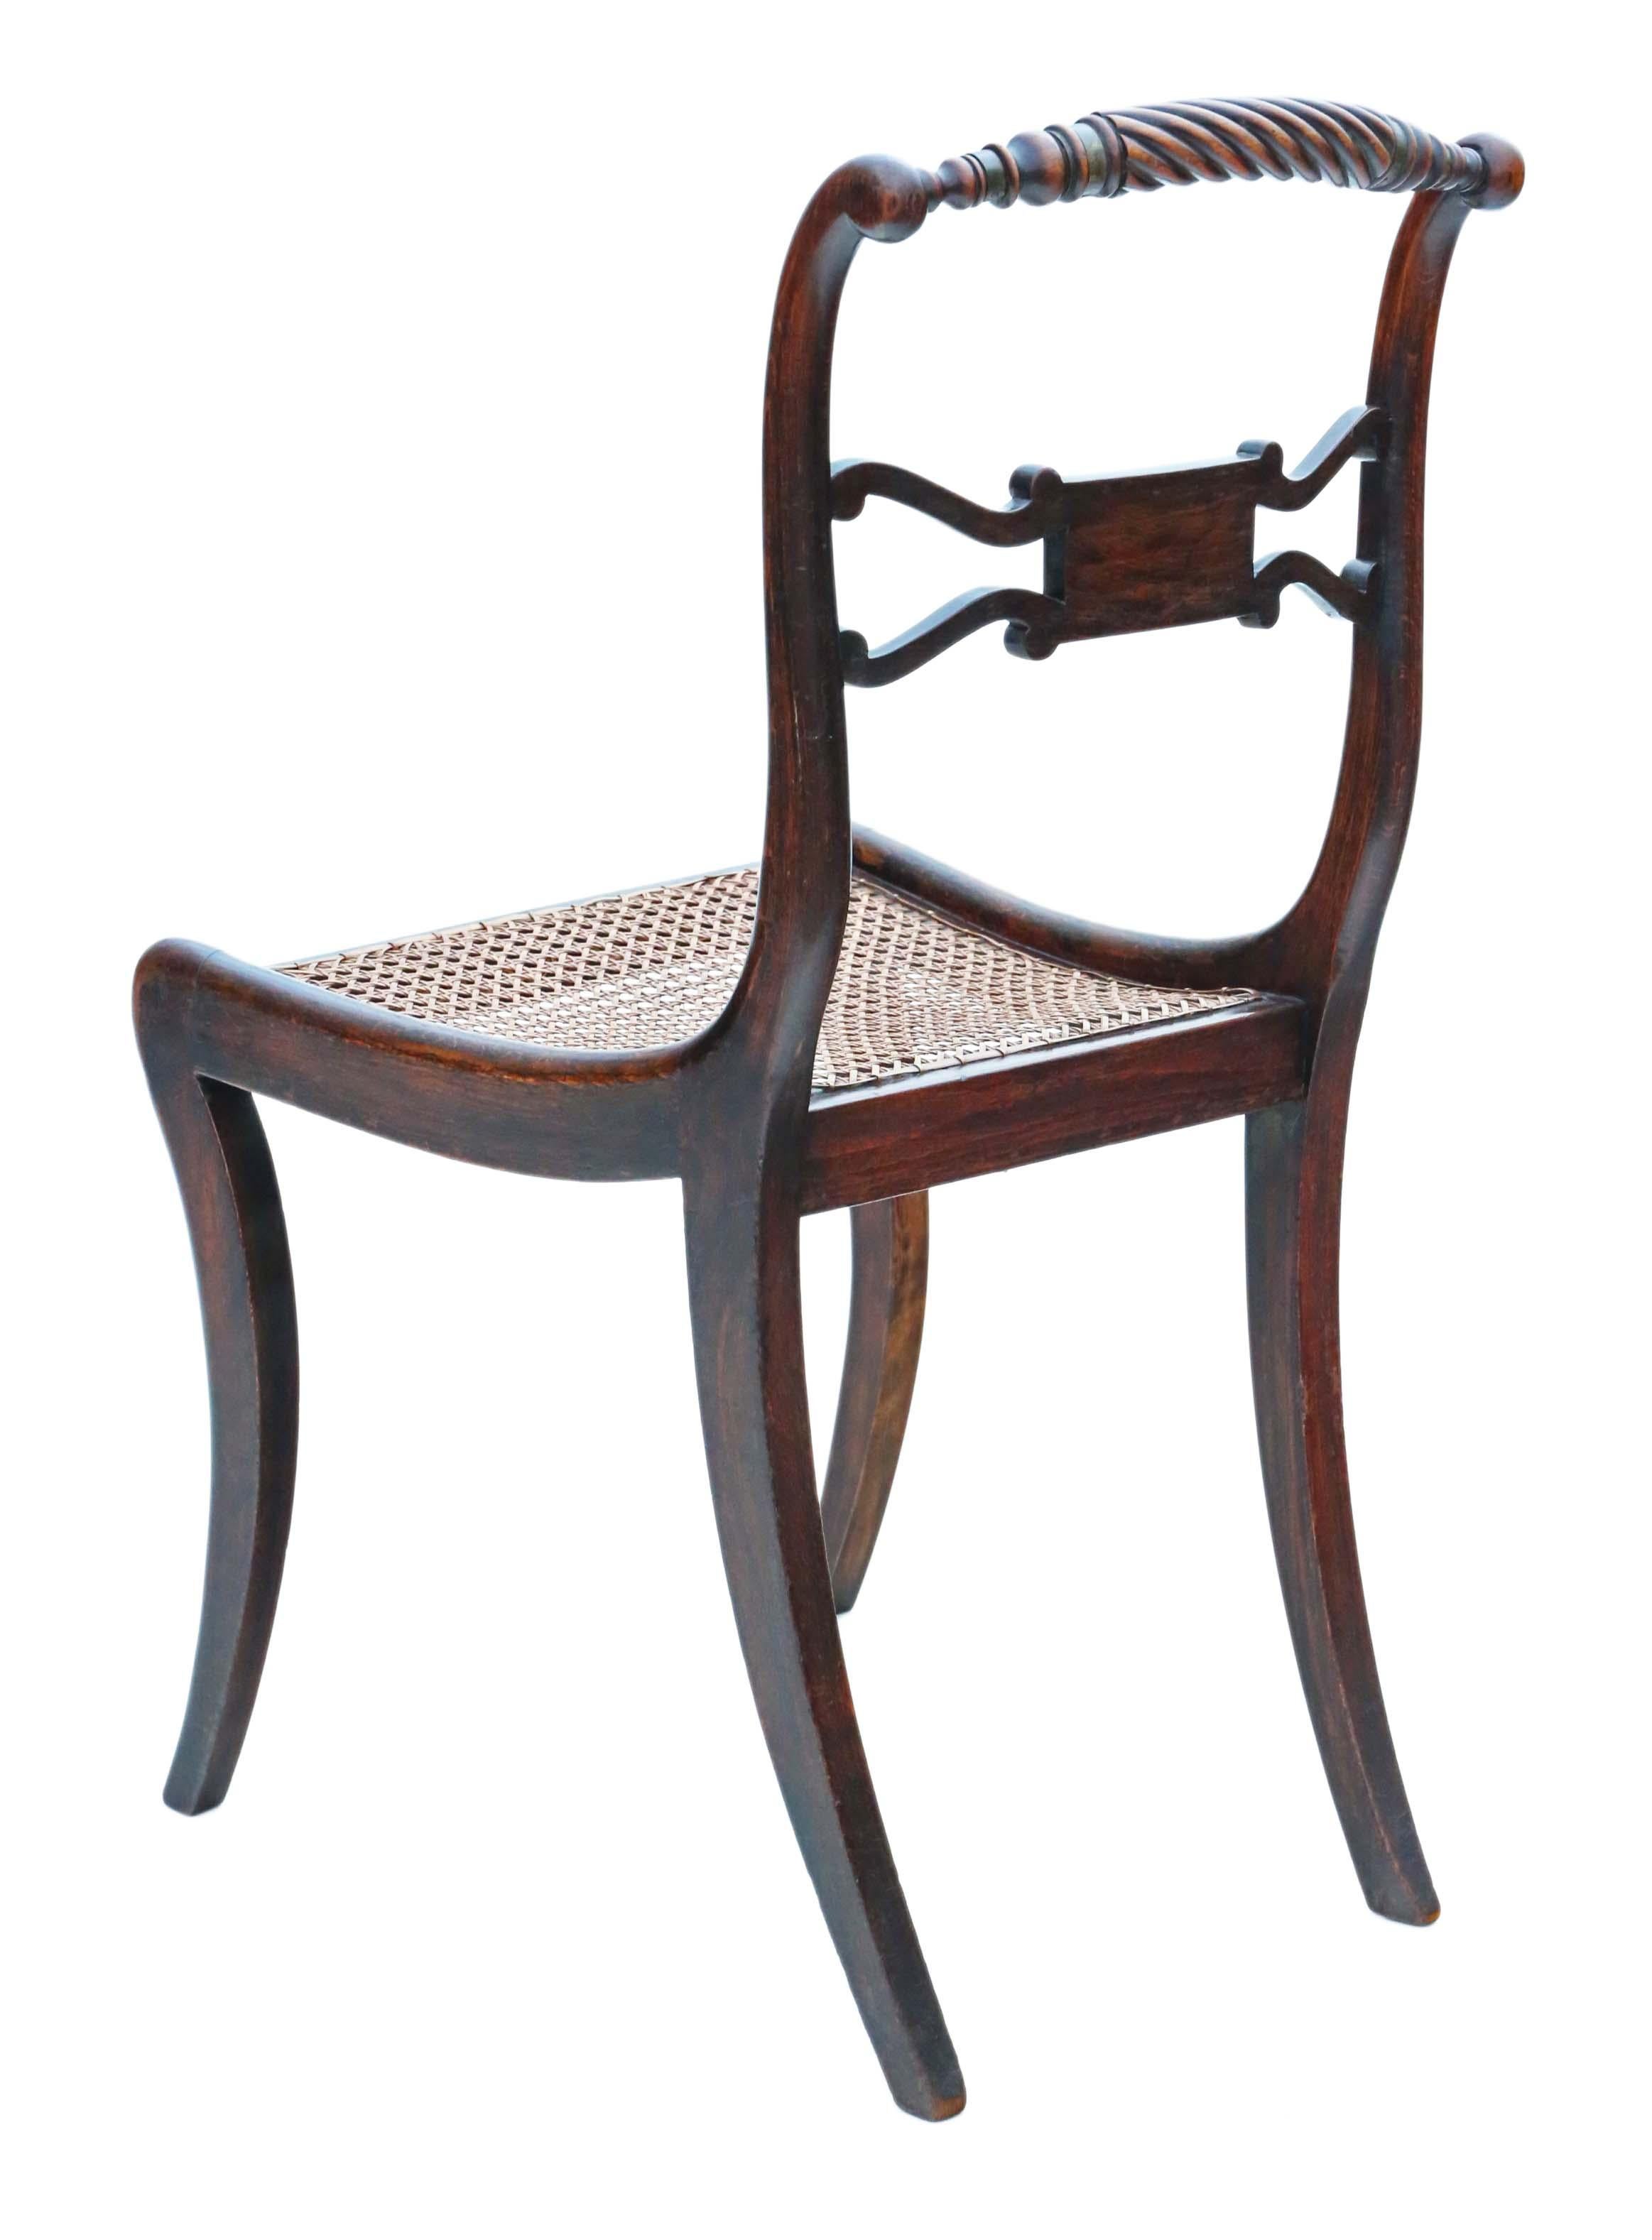 Regency Faux Rosewood Dining Chairs: Set of 8, Antique Quality, 19th Century 1